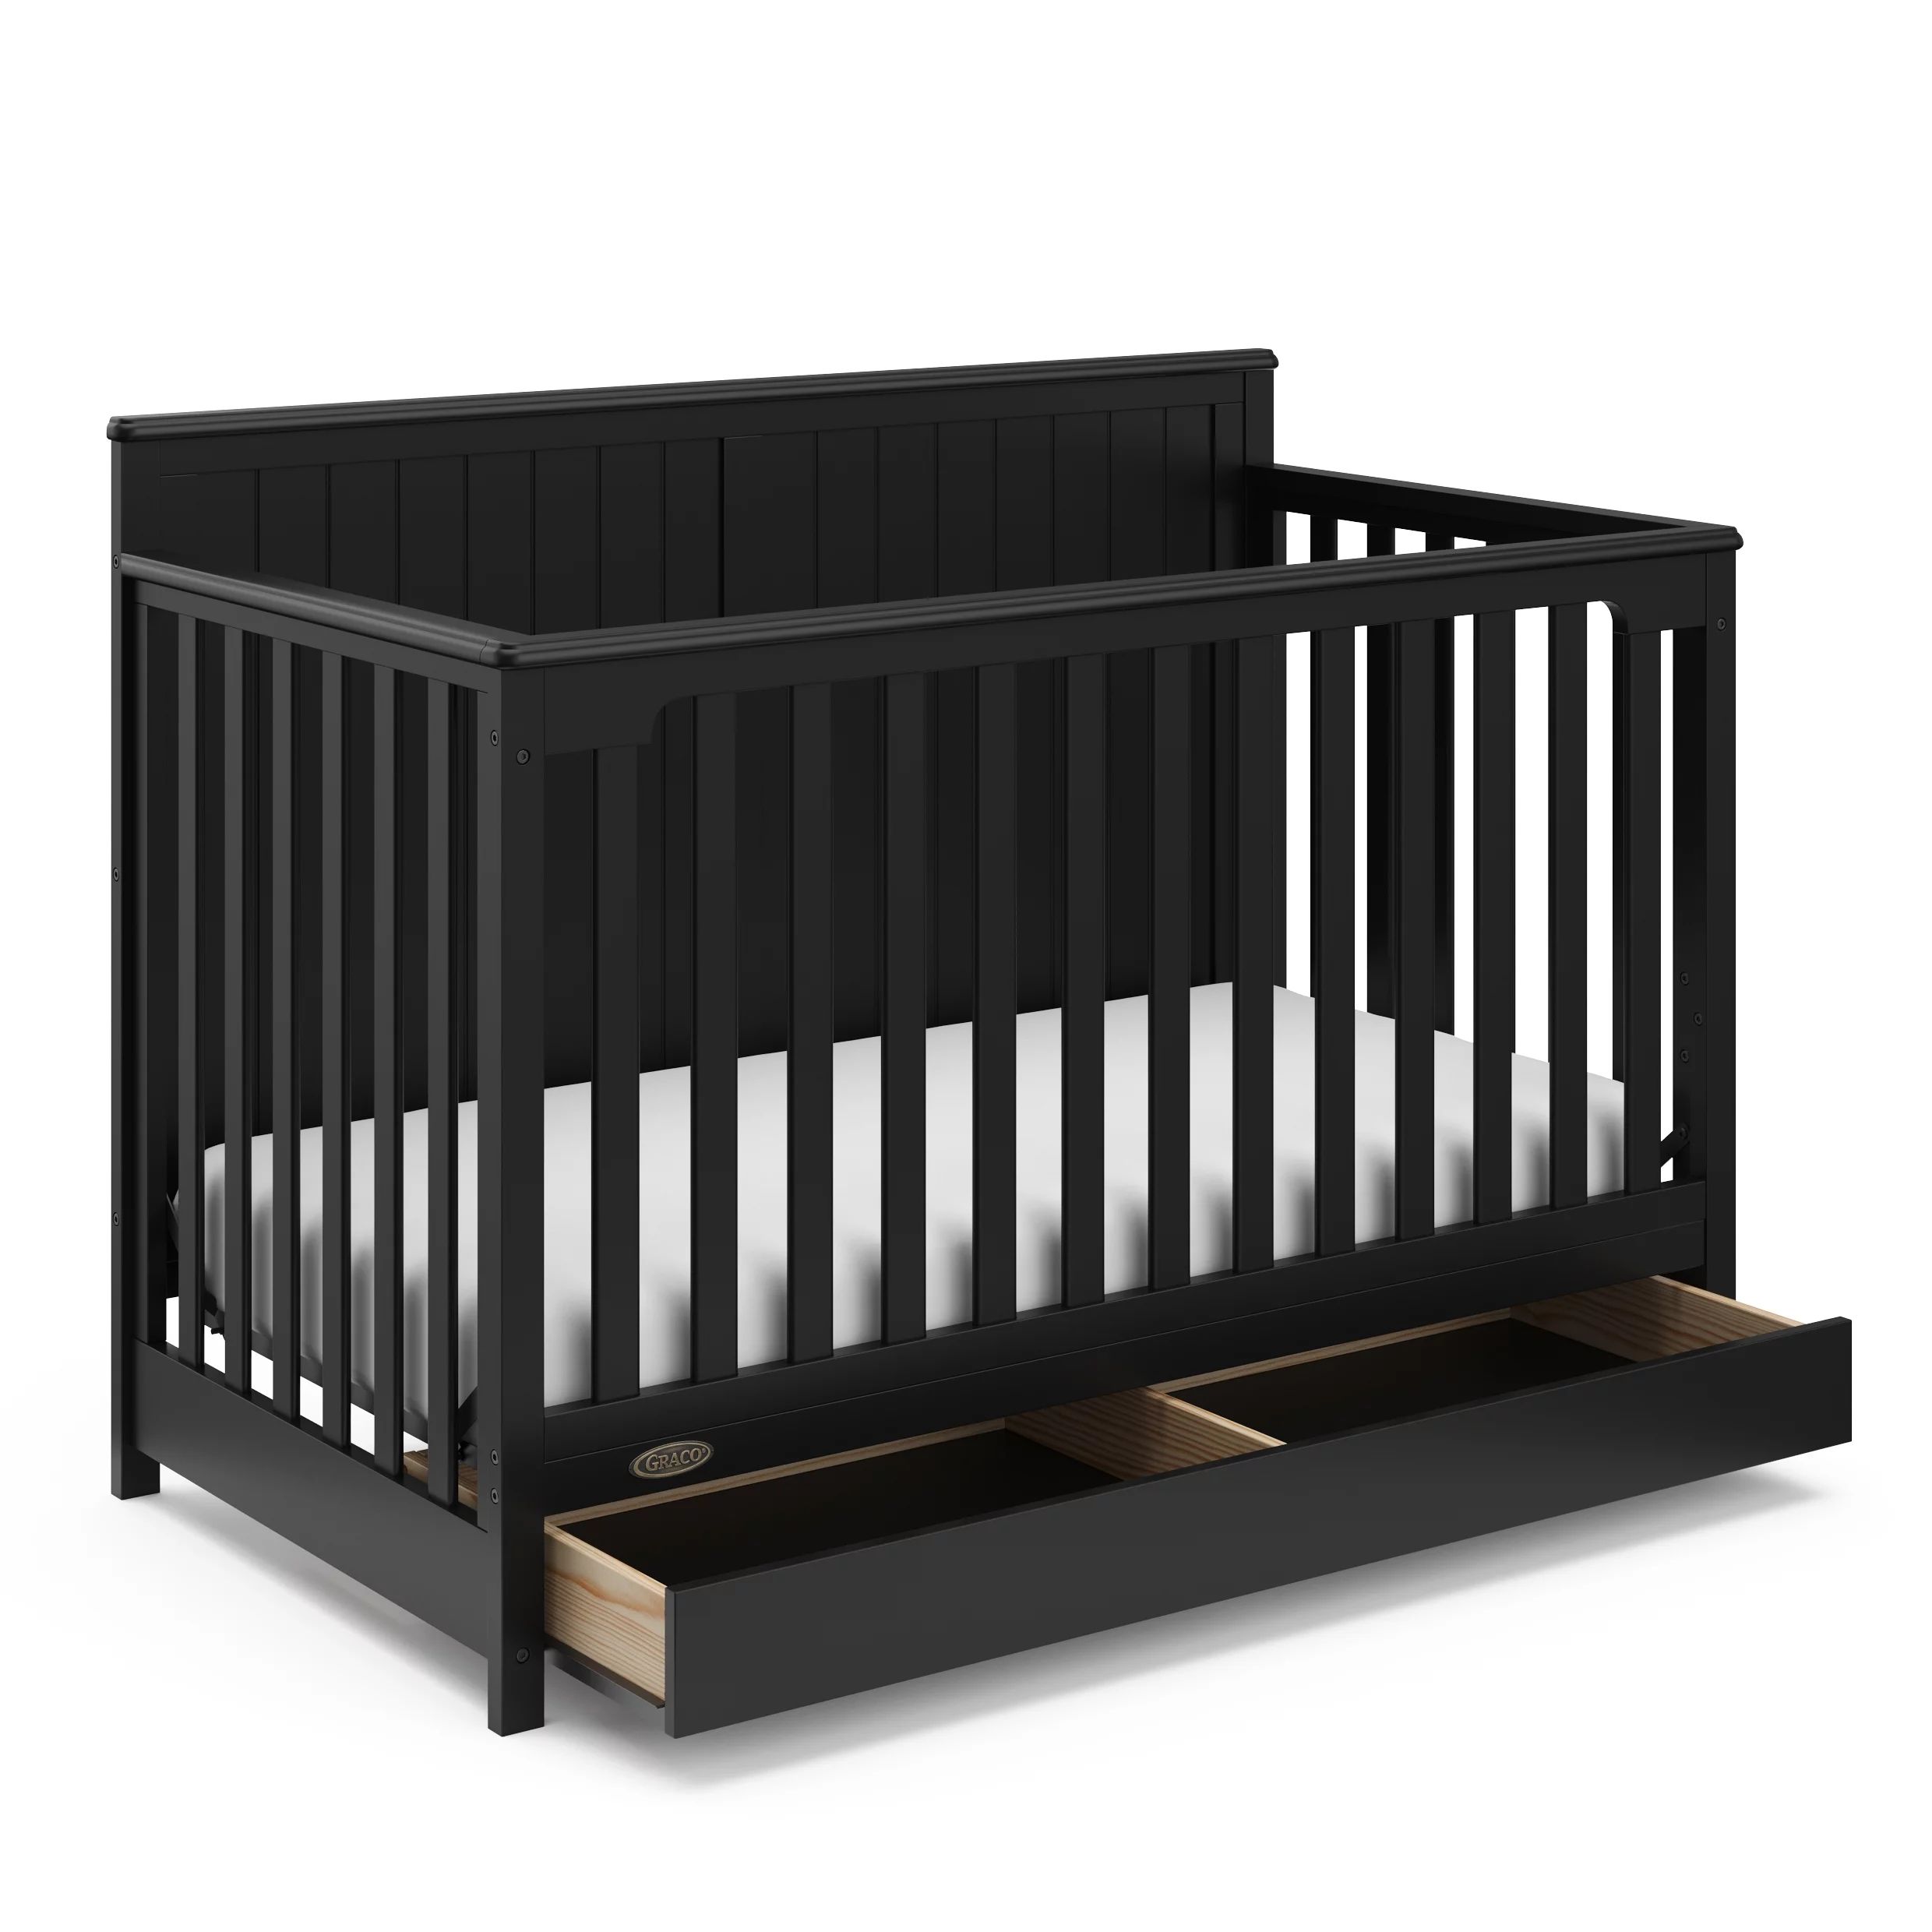 Graco Hadley 5-in-1 Convertible Baby Crib with Drawer, Black | Walmart (US)